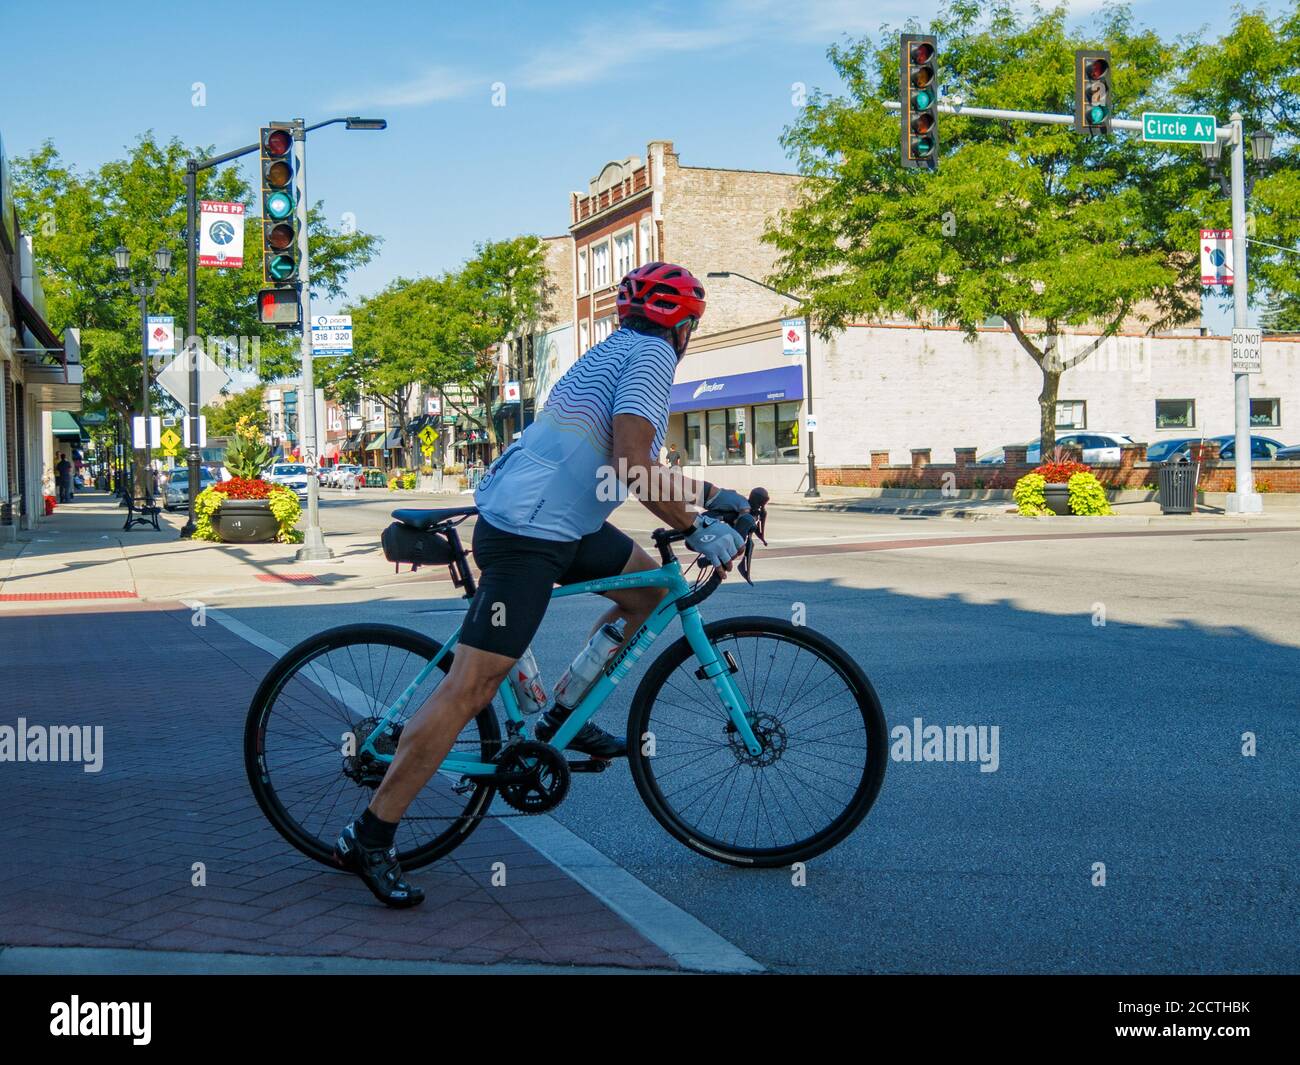 Cyclist preparing to cross intersection.  Forest Park, Illinois. Stock Photo